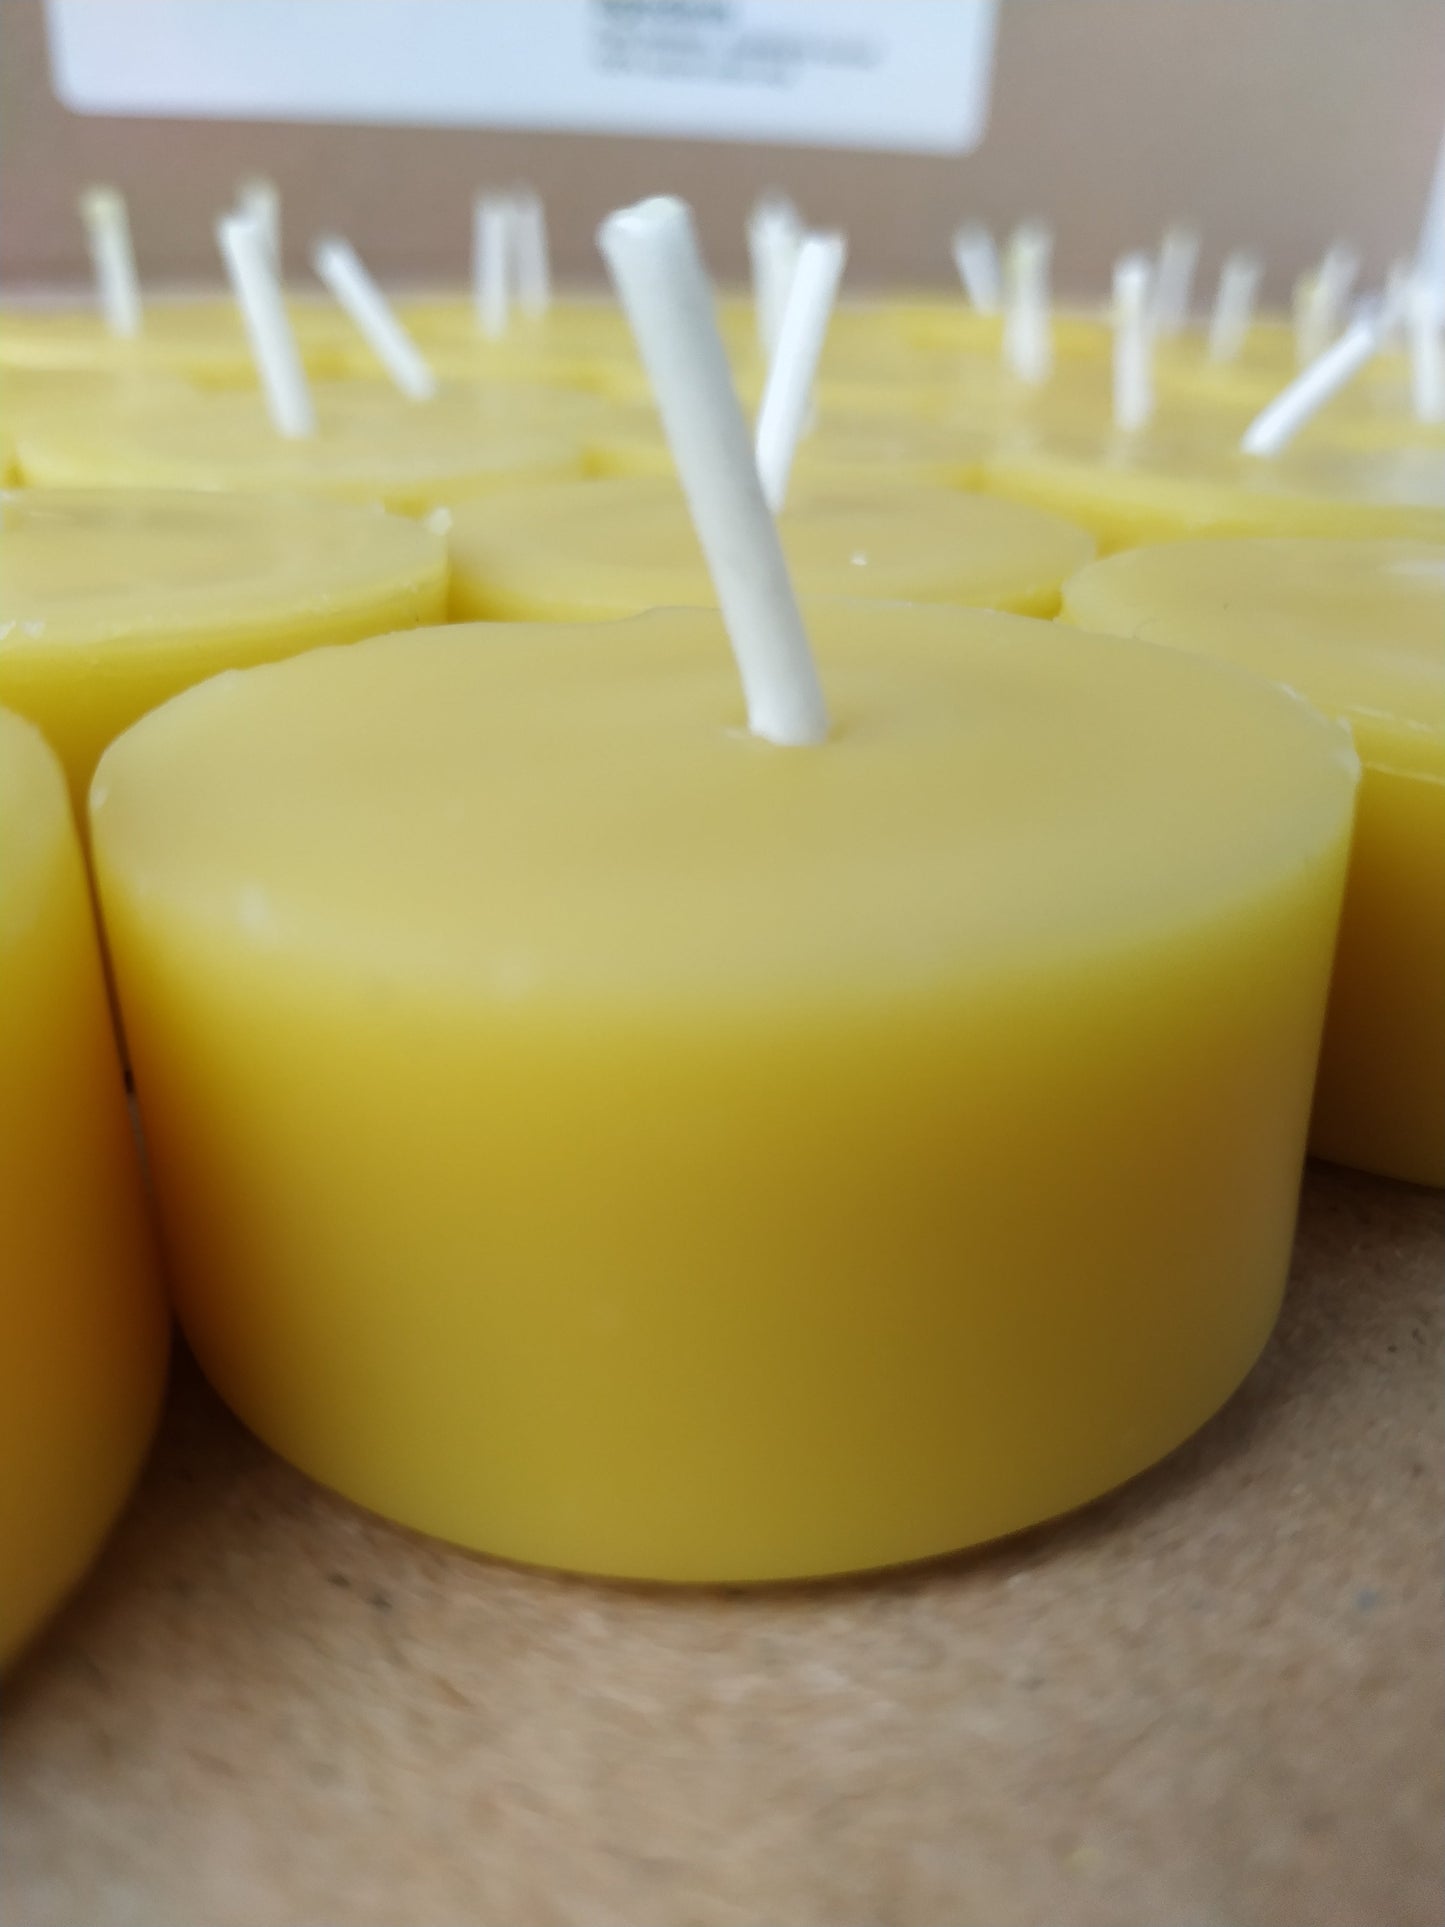 PURE Beeswax tealights, Hand poured, natural tea candles, 100% beeswax-various packs & refills - BEE Zero WastePURE Beeswax tealights, Hand poured, natural tea candles, 100% beeswax-various packs & refills - BEE Zero Waste